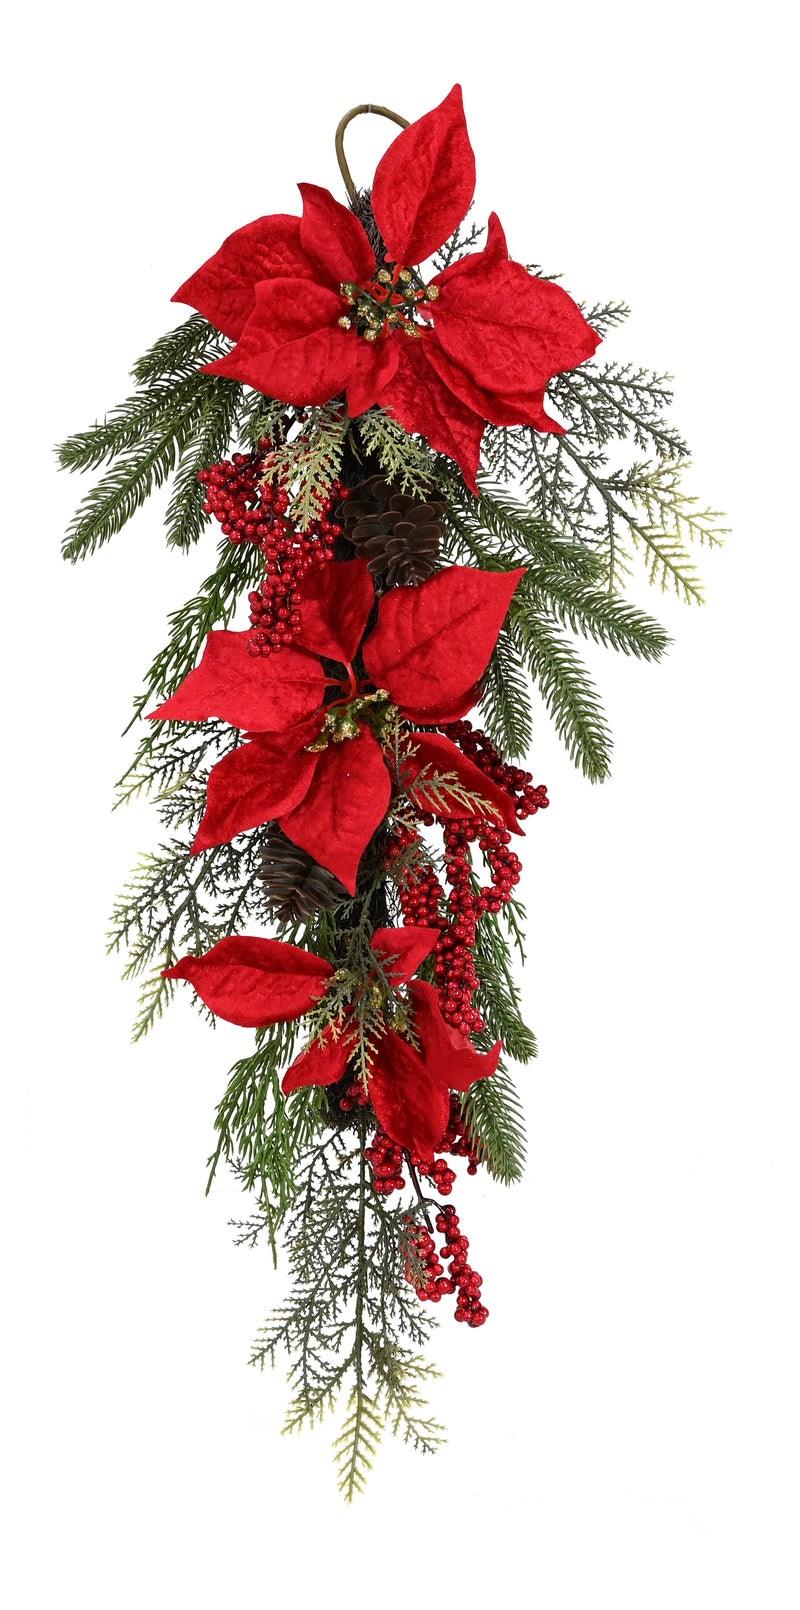 COMING SOON - RED POINSETTIA HANGING DECO